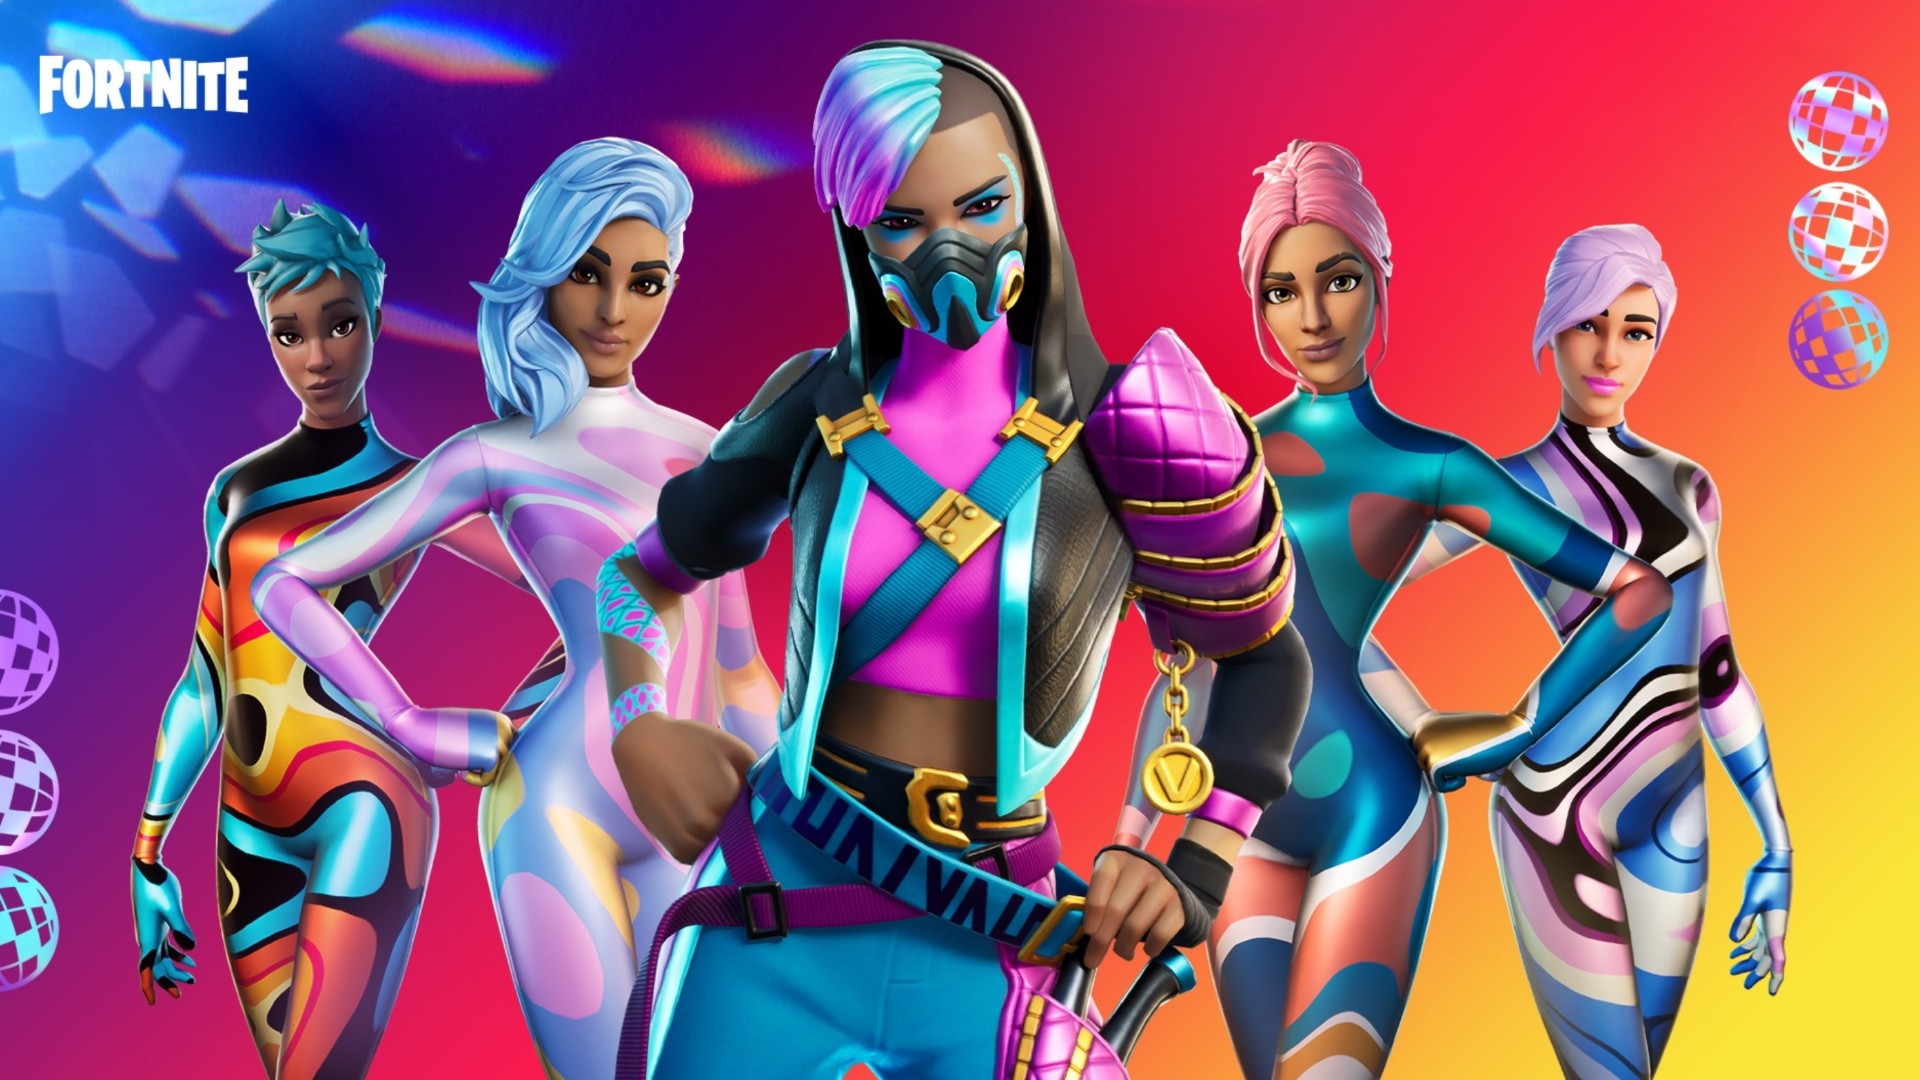  Epic sues Google after Fortnite is kicked off the Play Store 